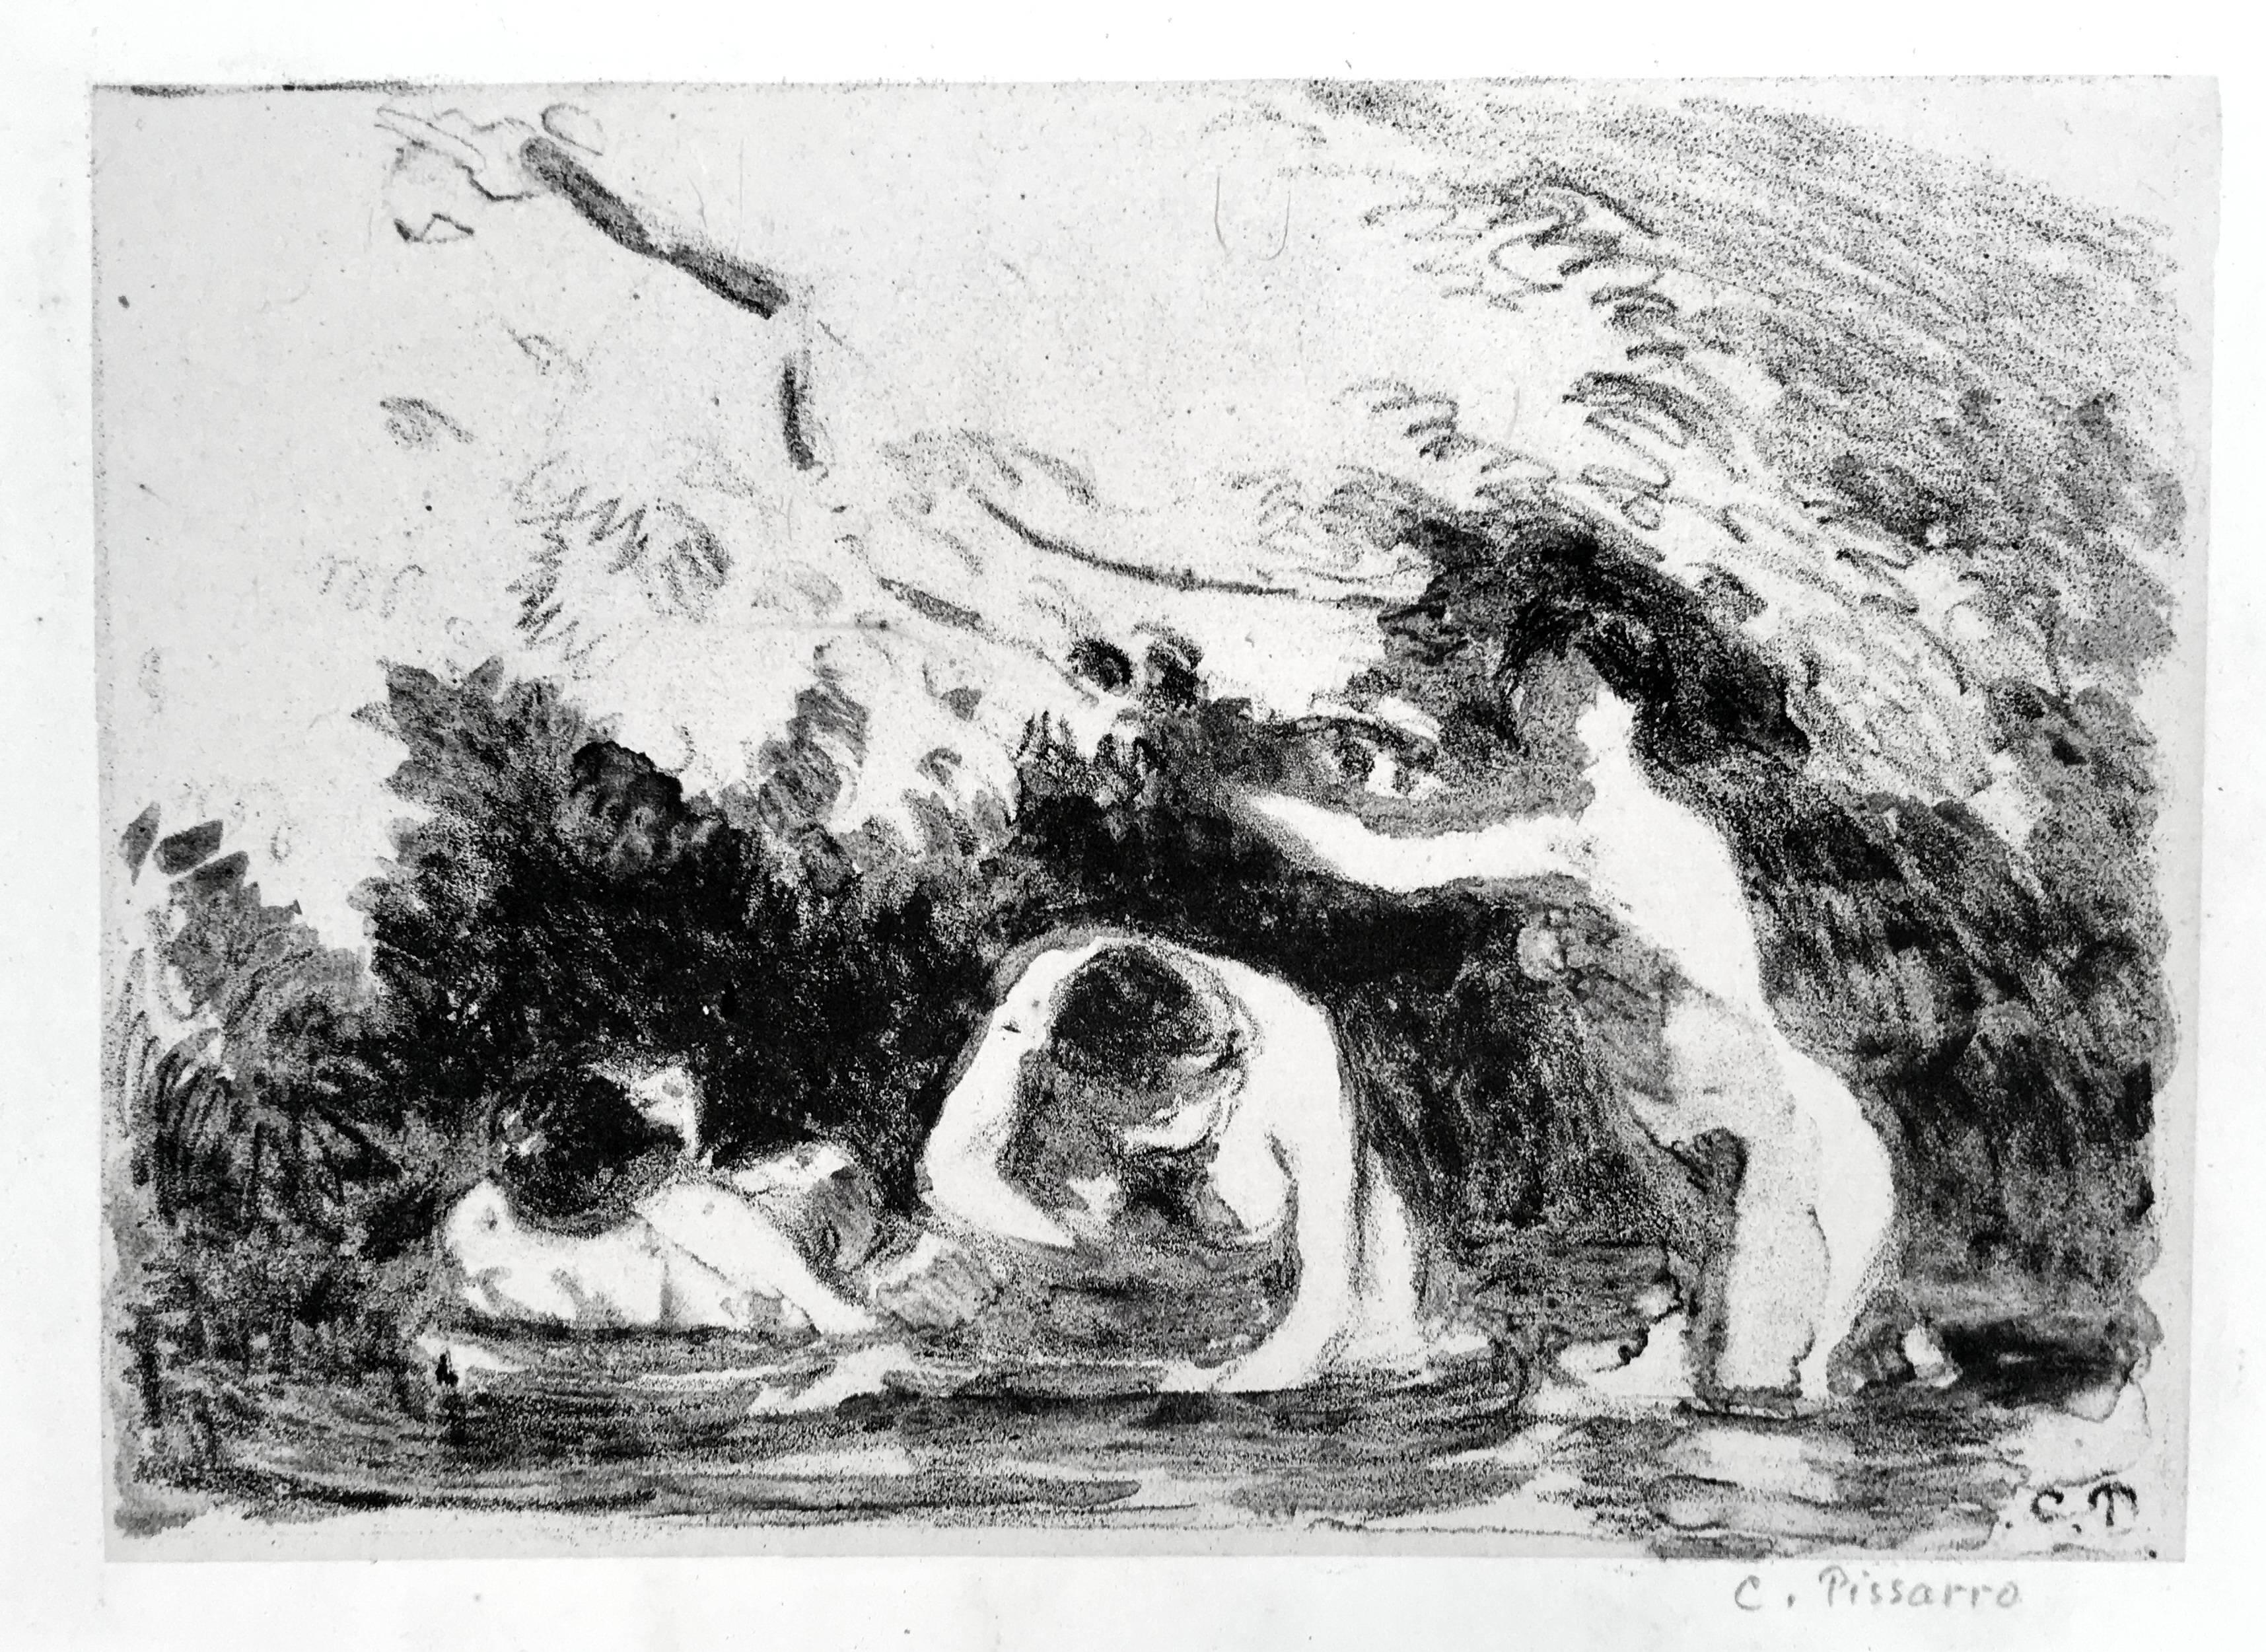 Baigneuses a L'Ombre des Berges Boisees (Women Bathing in the Wooded Shade...)